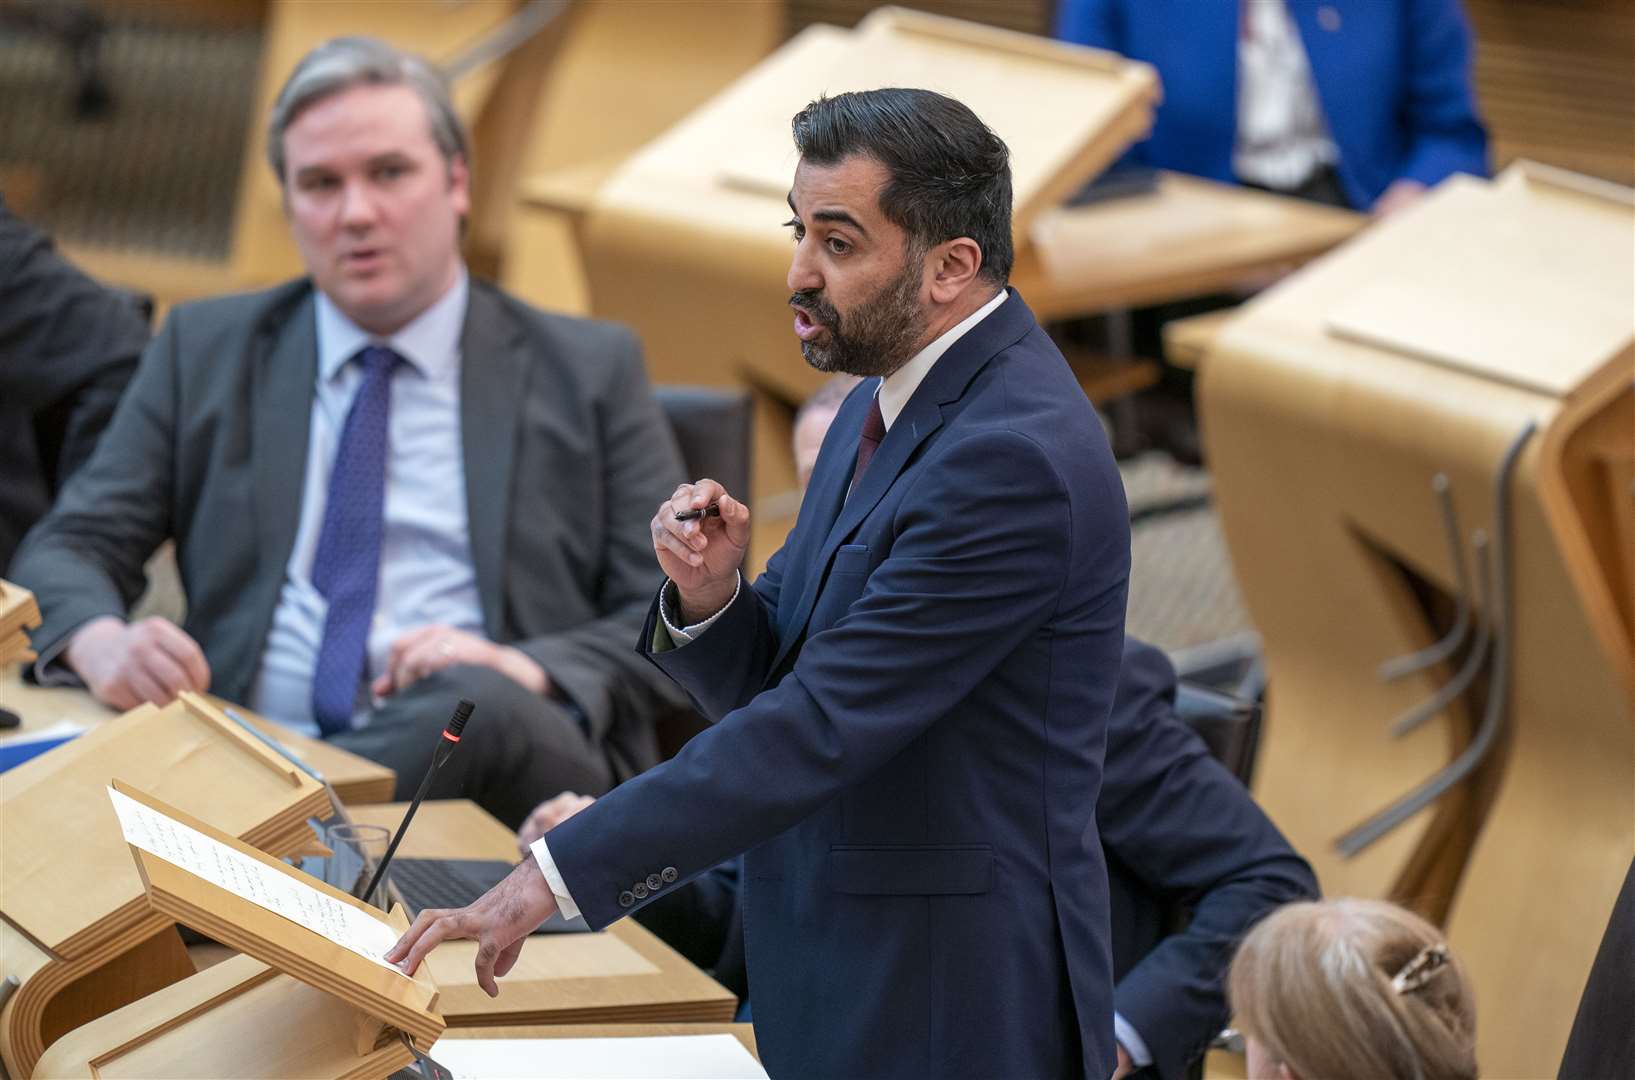 Humza Yousaf delivered his Our Priorities for Scotland statement to Parliament on the same day the SNP treasurer was arrested (Jane Barlow/PA)